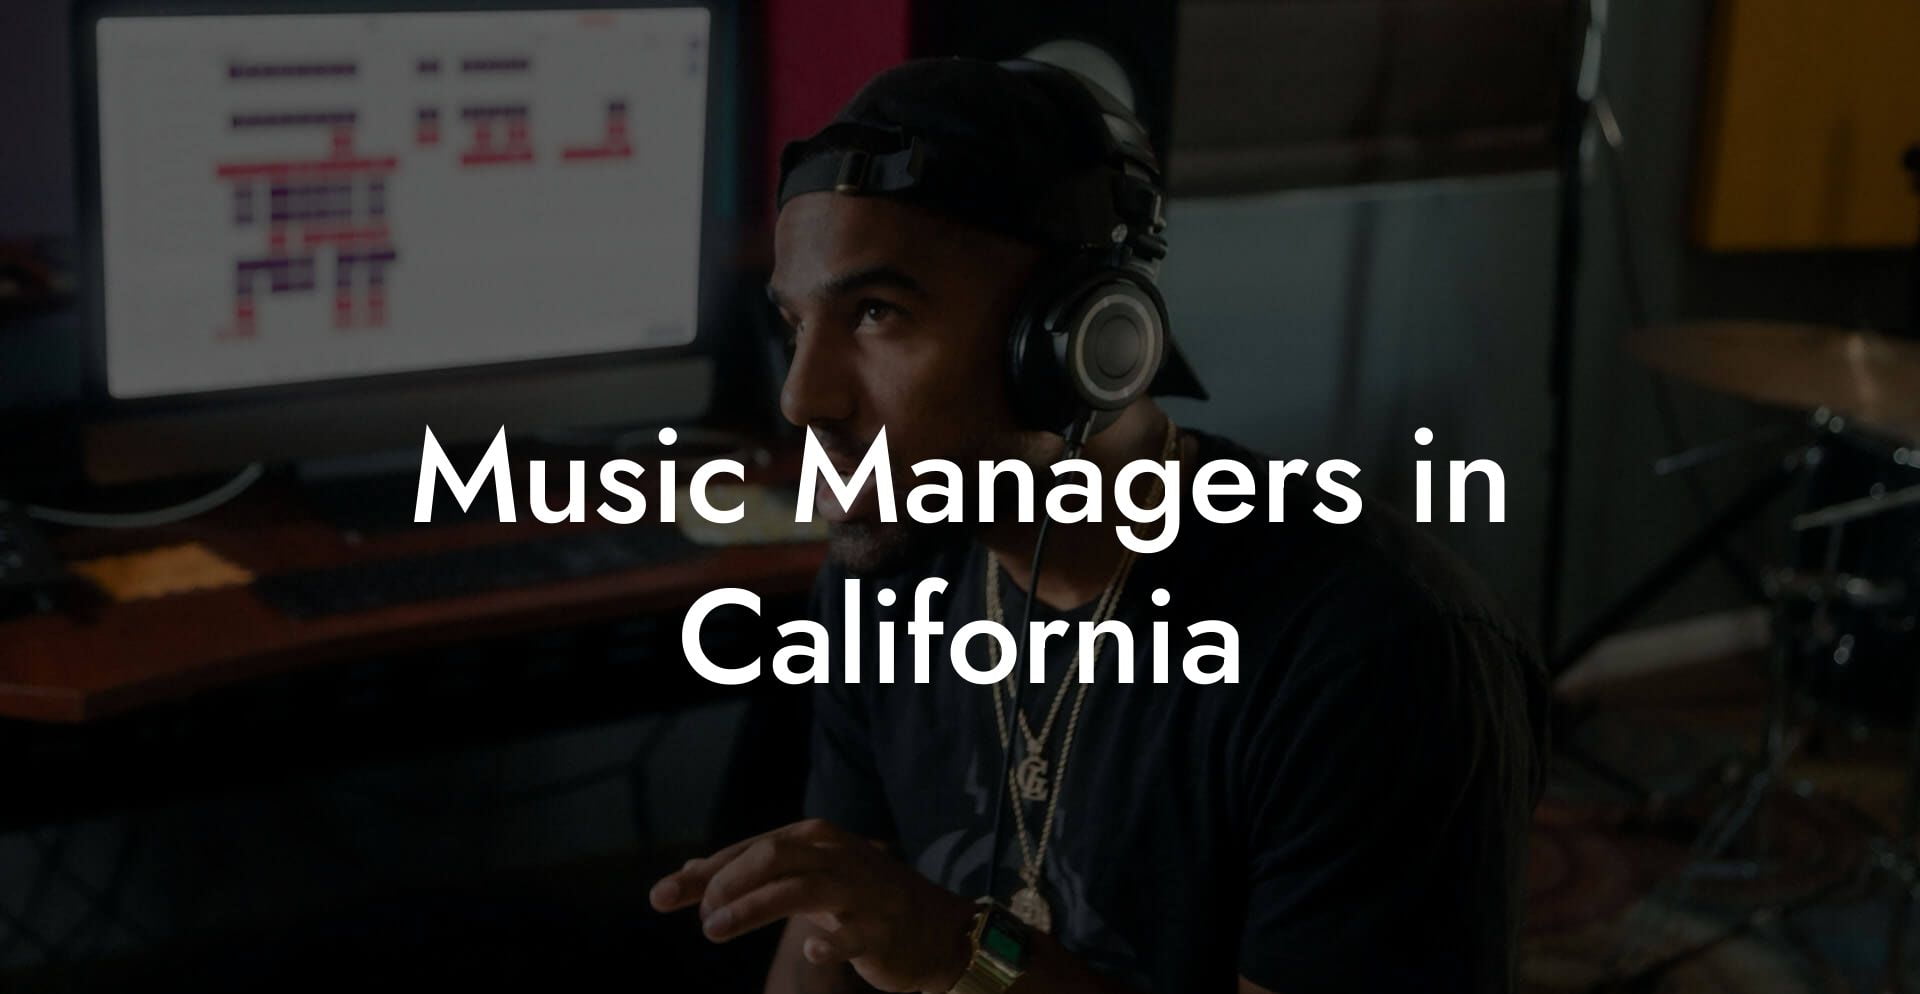 Music Managers in California